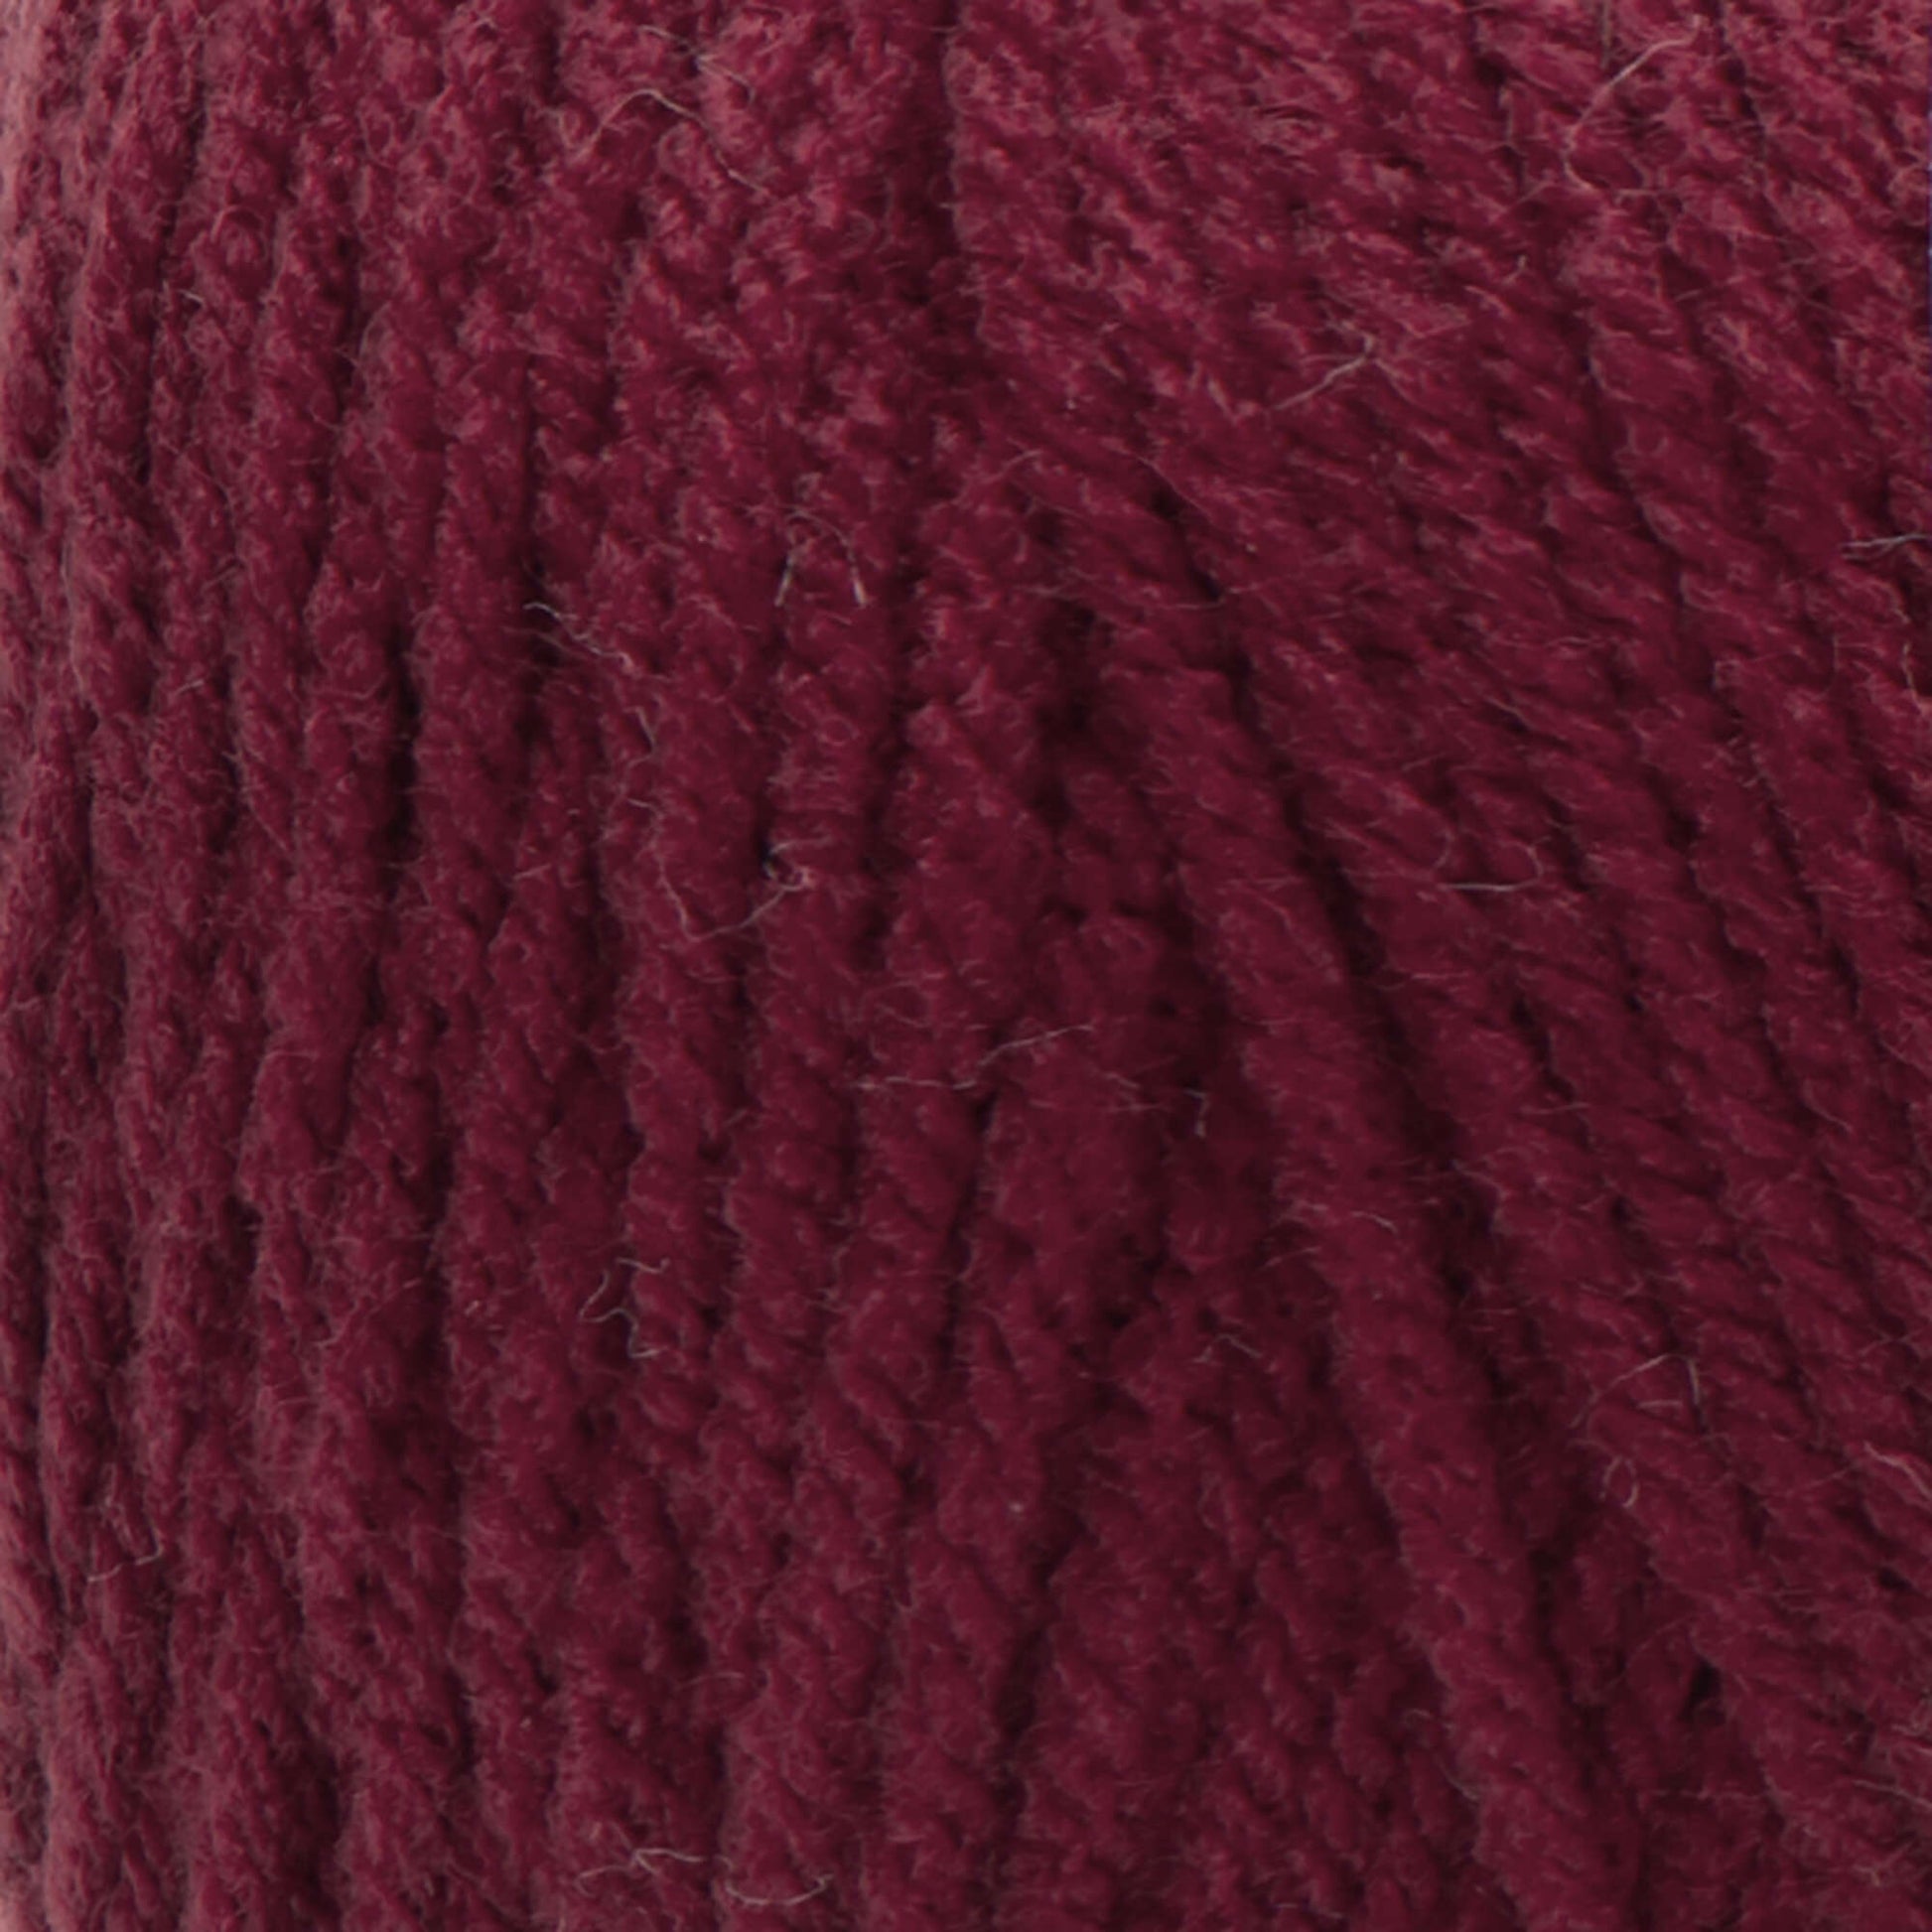 Red Heart With Love Yarn - Discontinued Shades